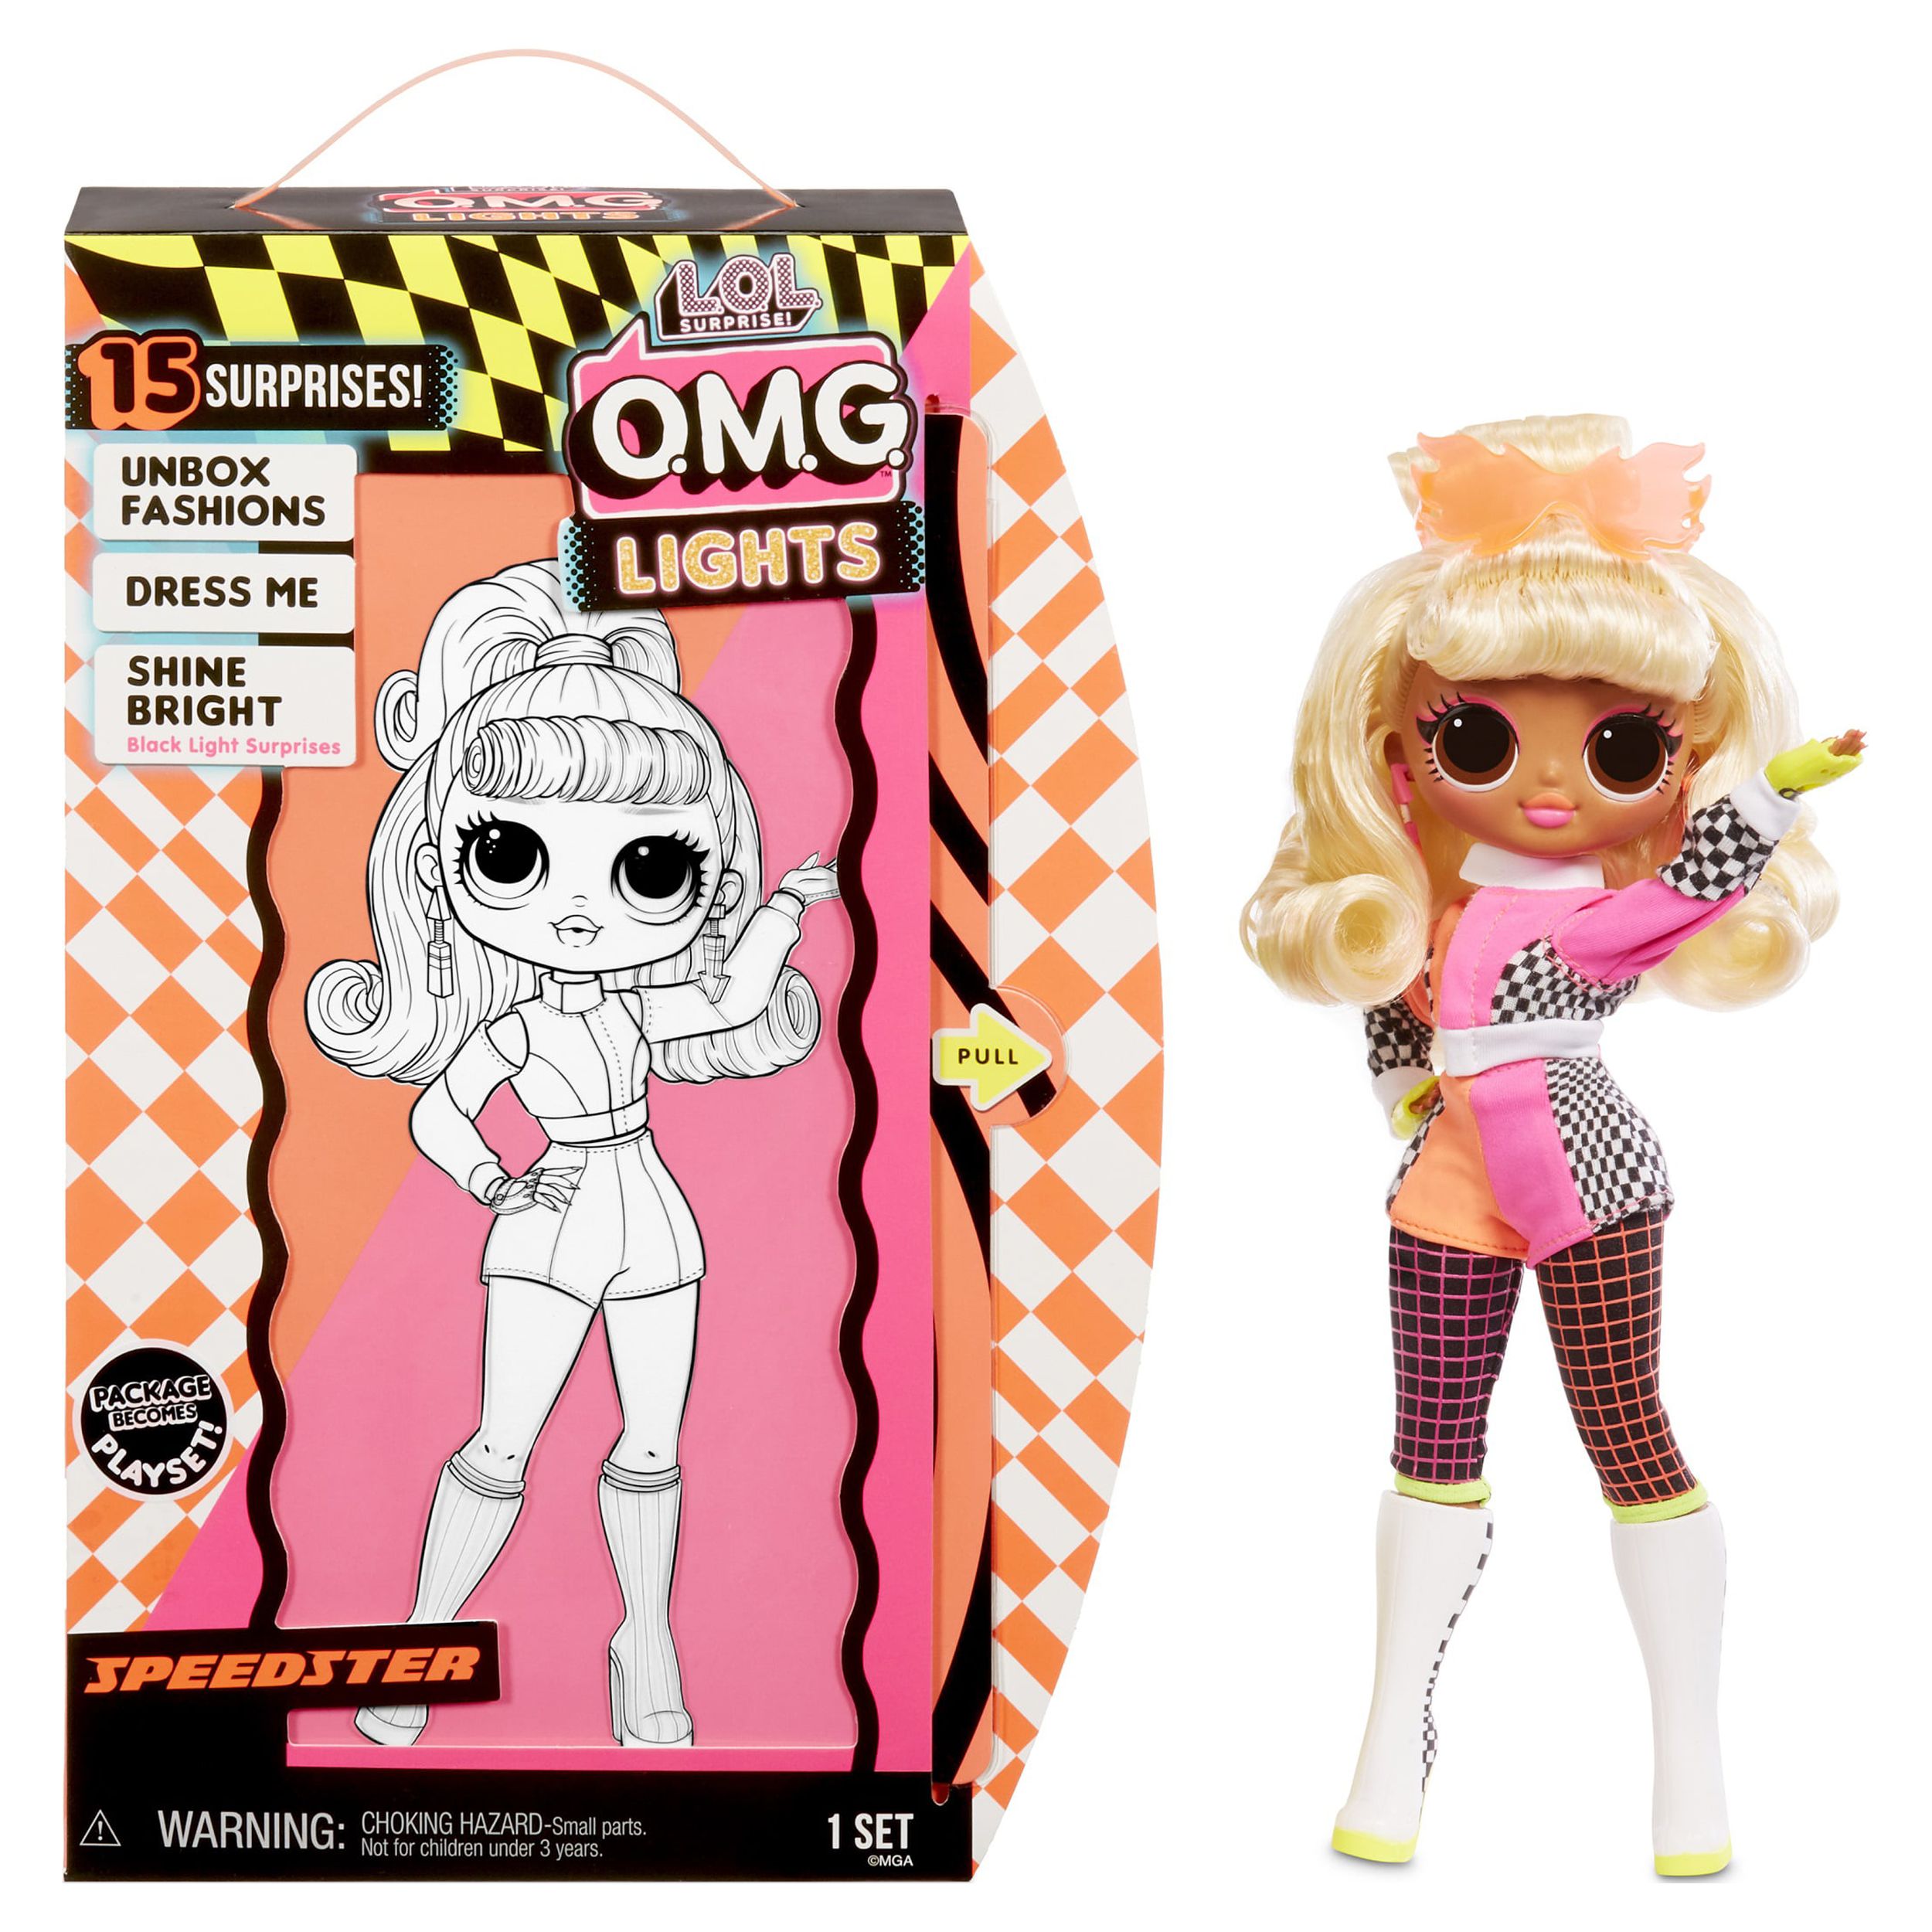 LOL Surprise OMG Lights Speedster Fashion Doll With 15 Surprises, Great Gift for Kids Ages 4 5 6+ - image 4 of 7